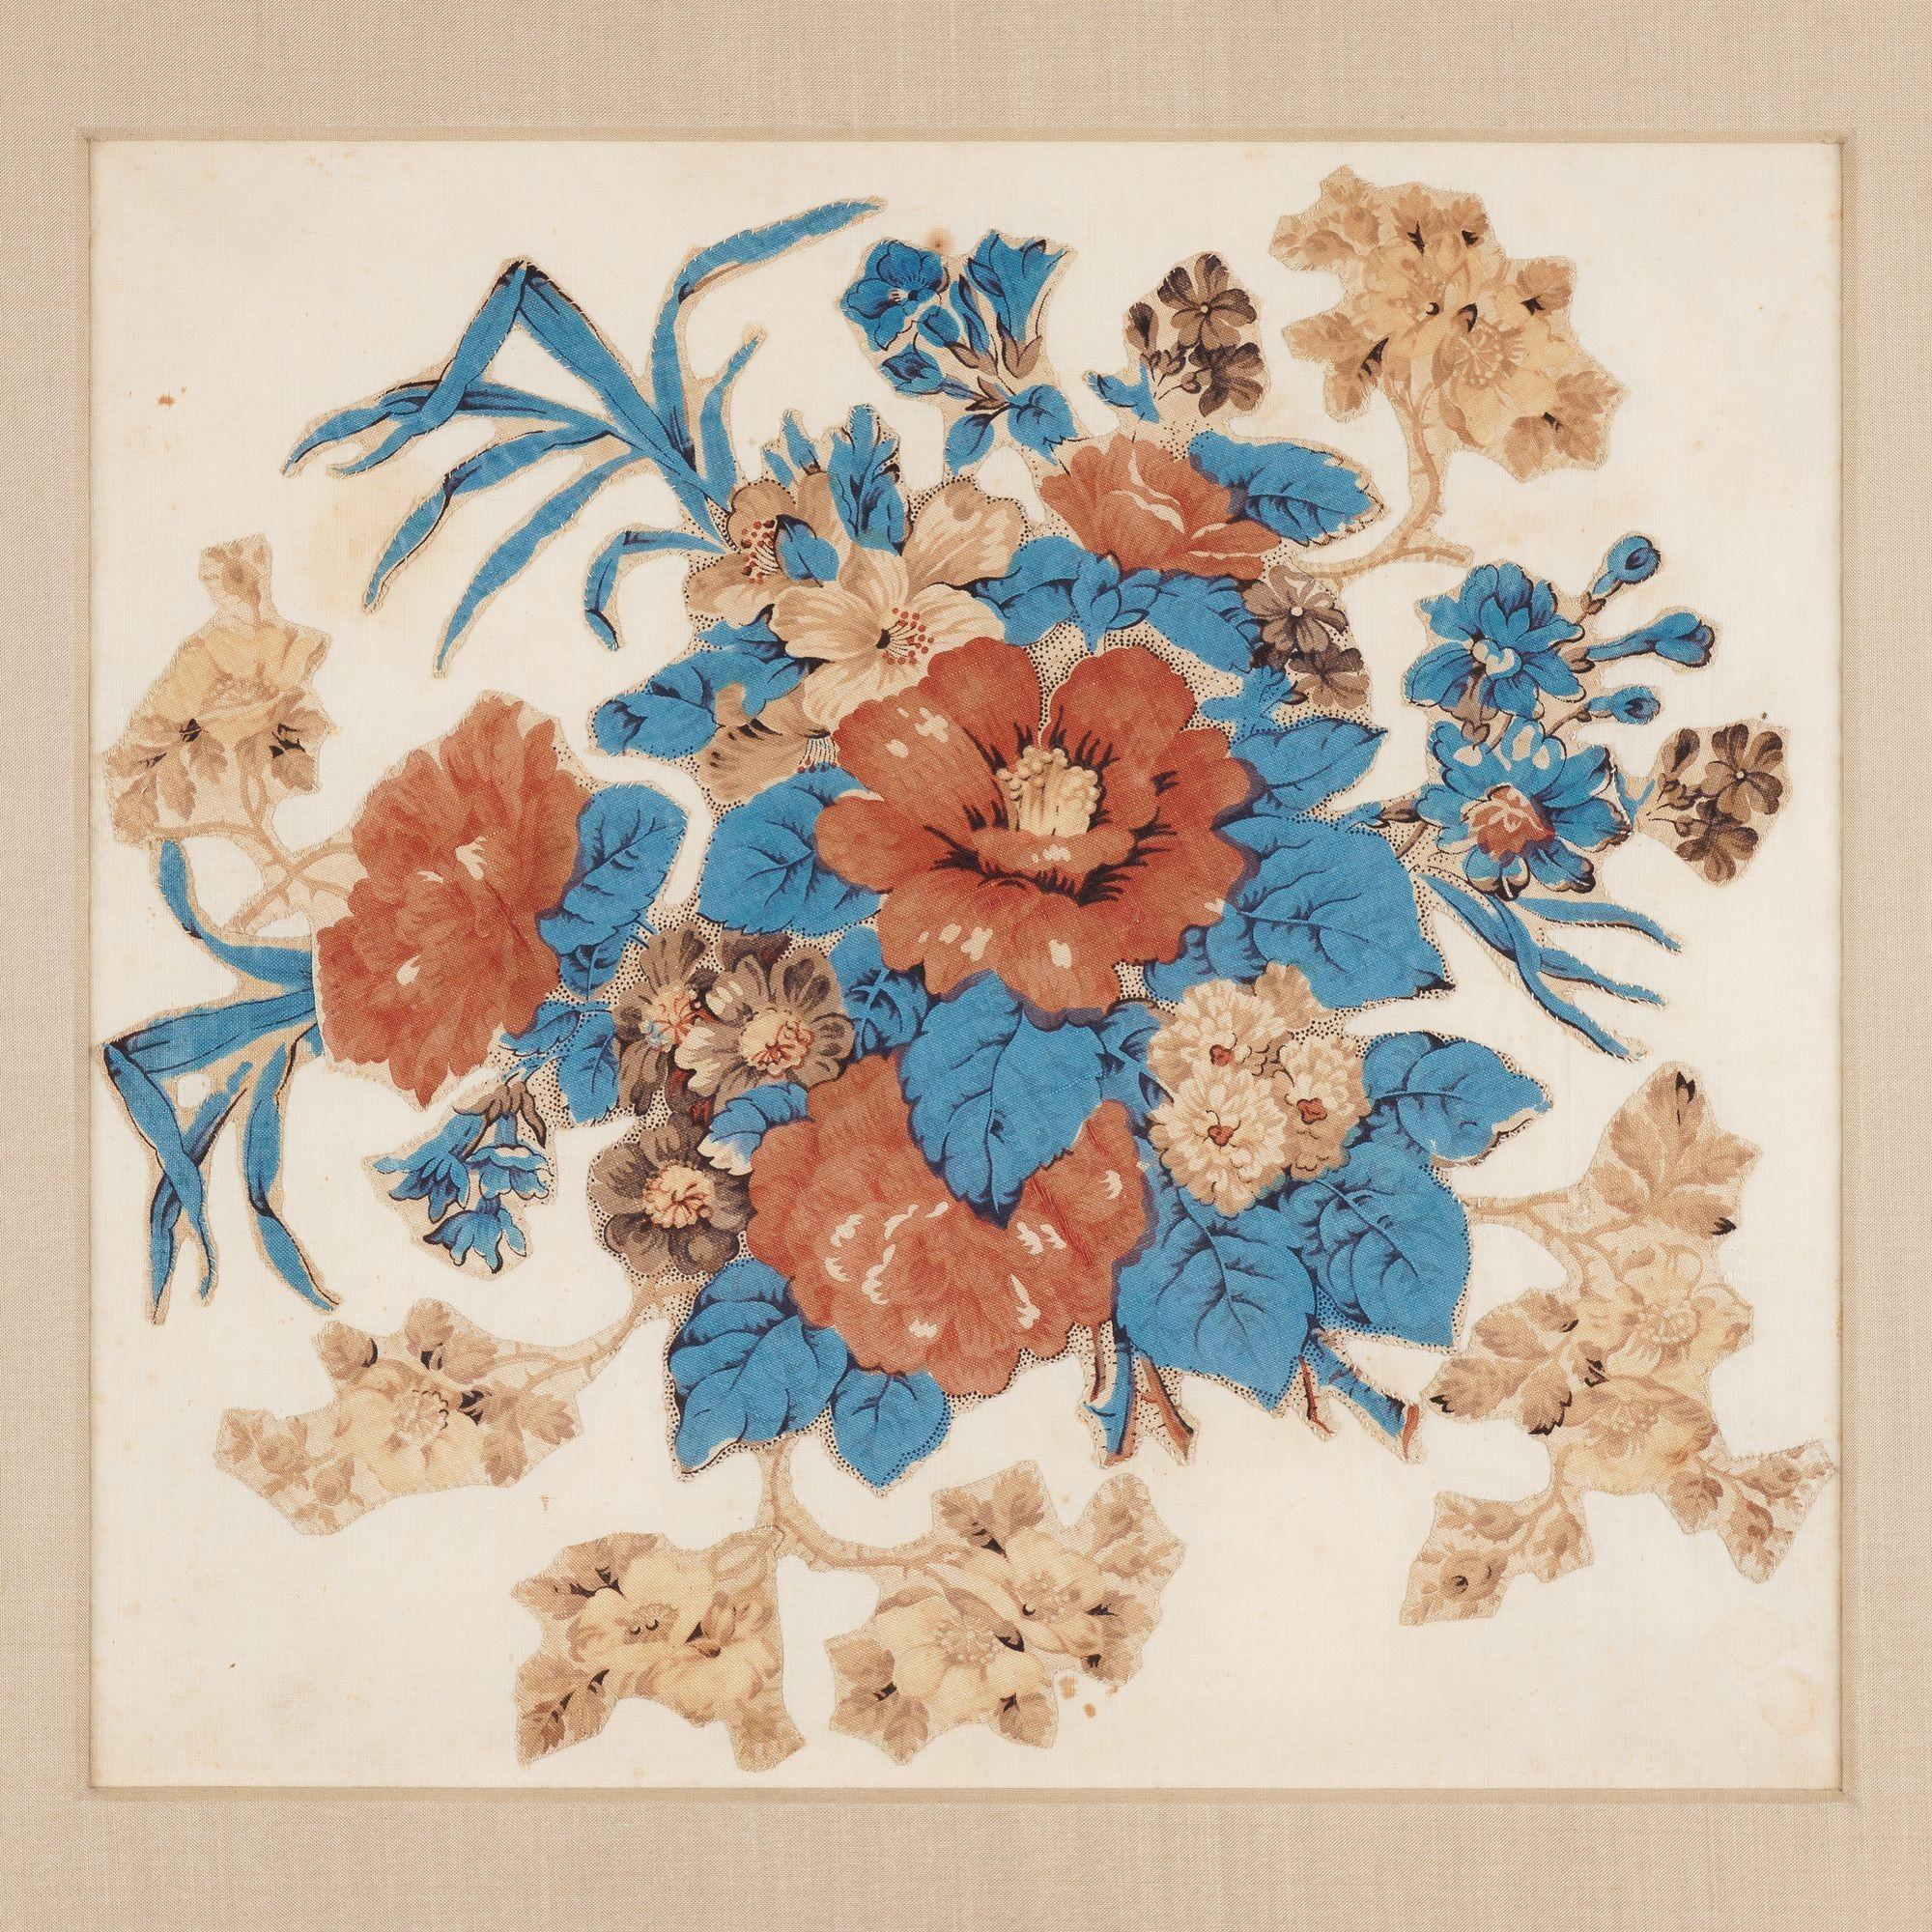 Floral bouquet chintz appliqué quilt square in red, blue, tan, and brown. Framed with a silk mat in UV filtering plexiglass box frame.

American, circa 1825-50.